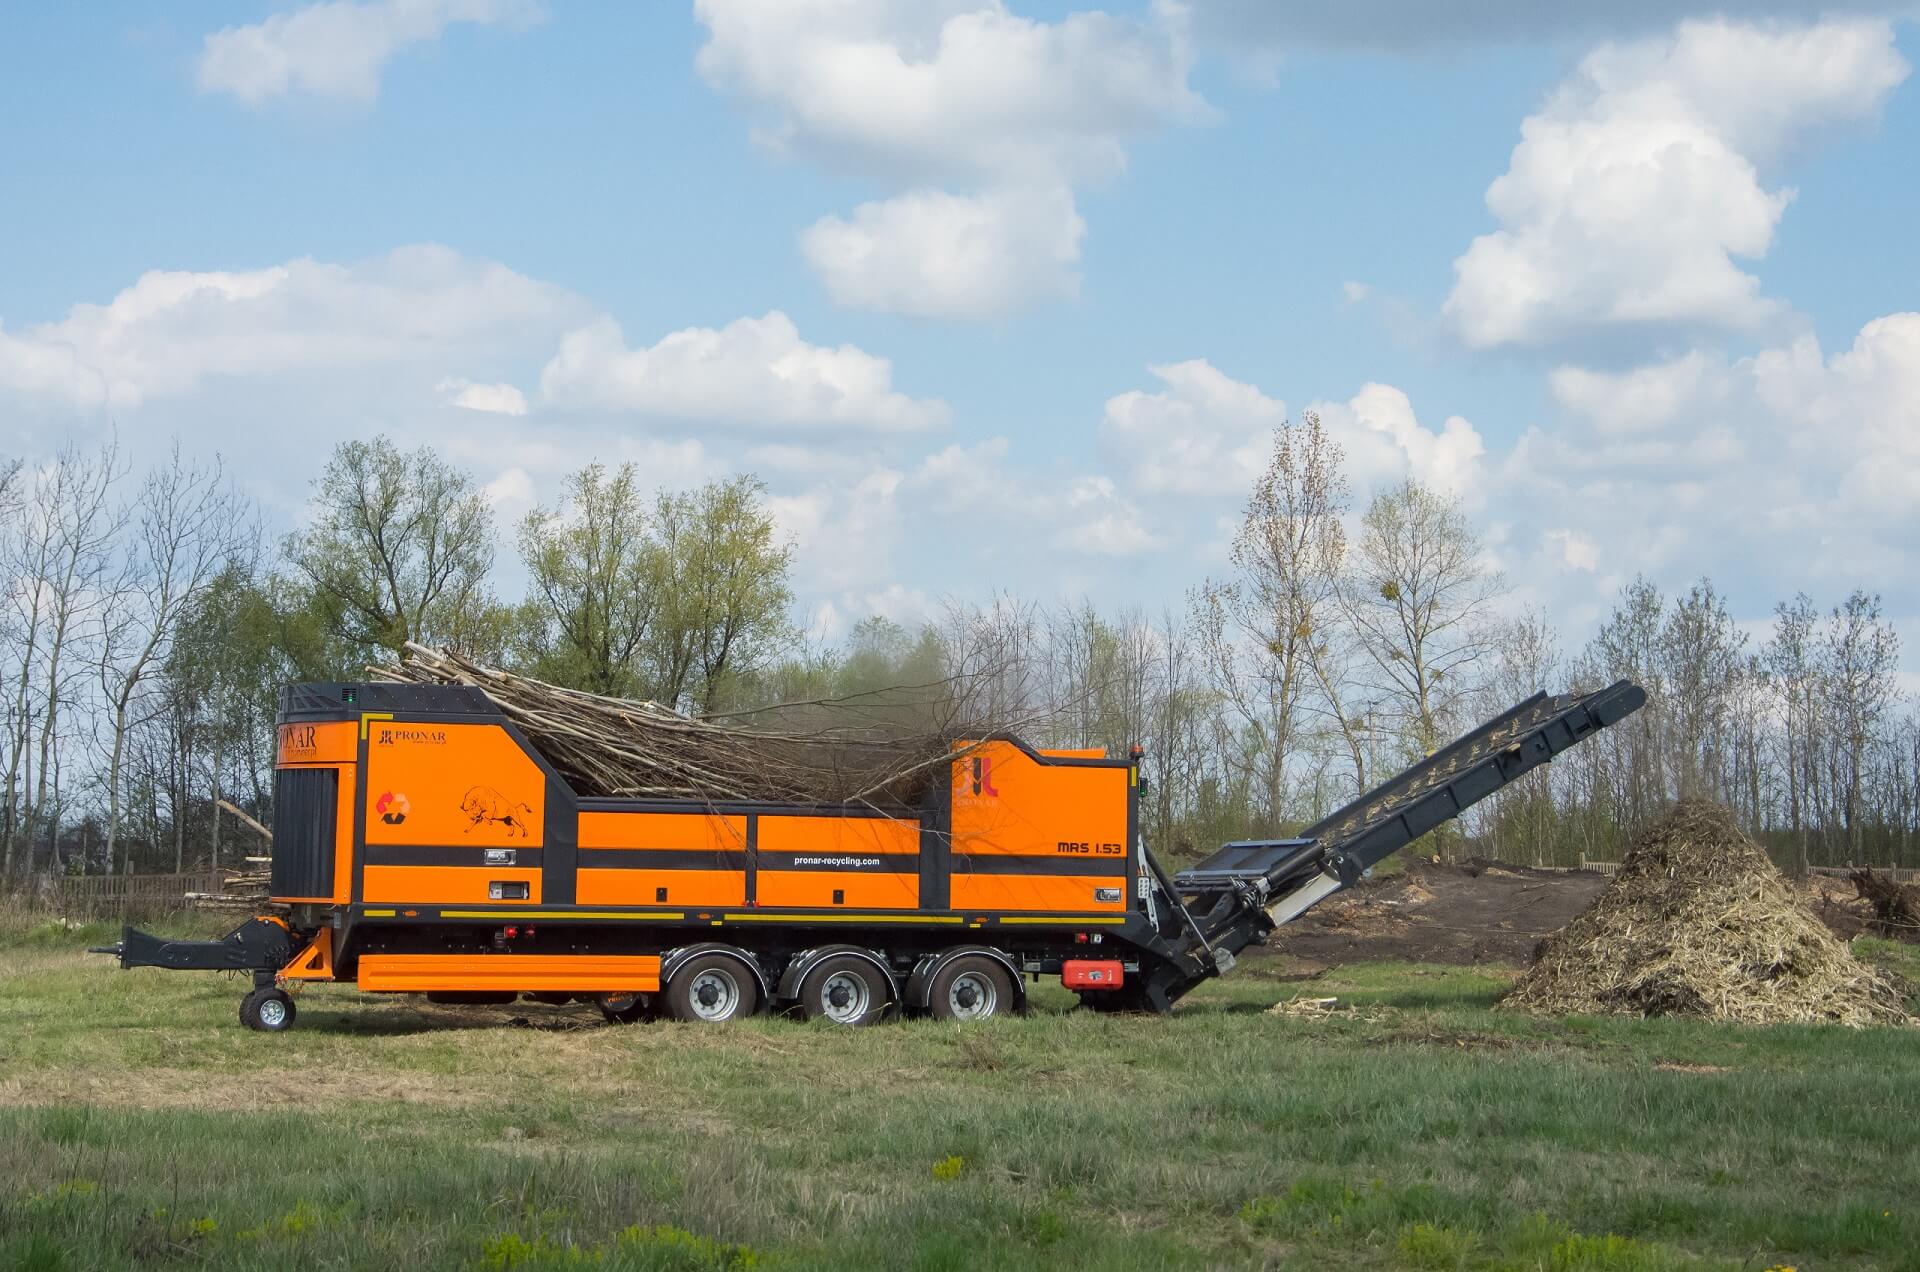 Mobile High-Speed ​​Shredder MRS 1.53. An orange machine the size of a combine harvester works in the field, mulching cut tree branches